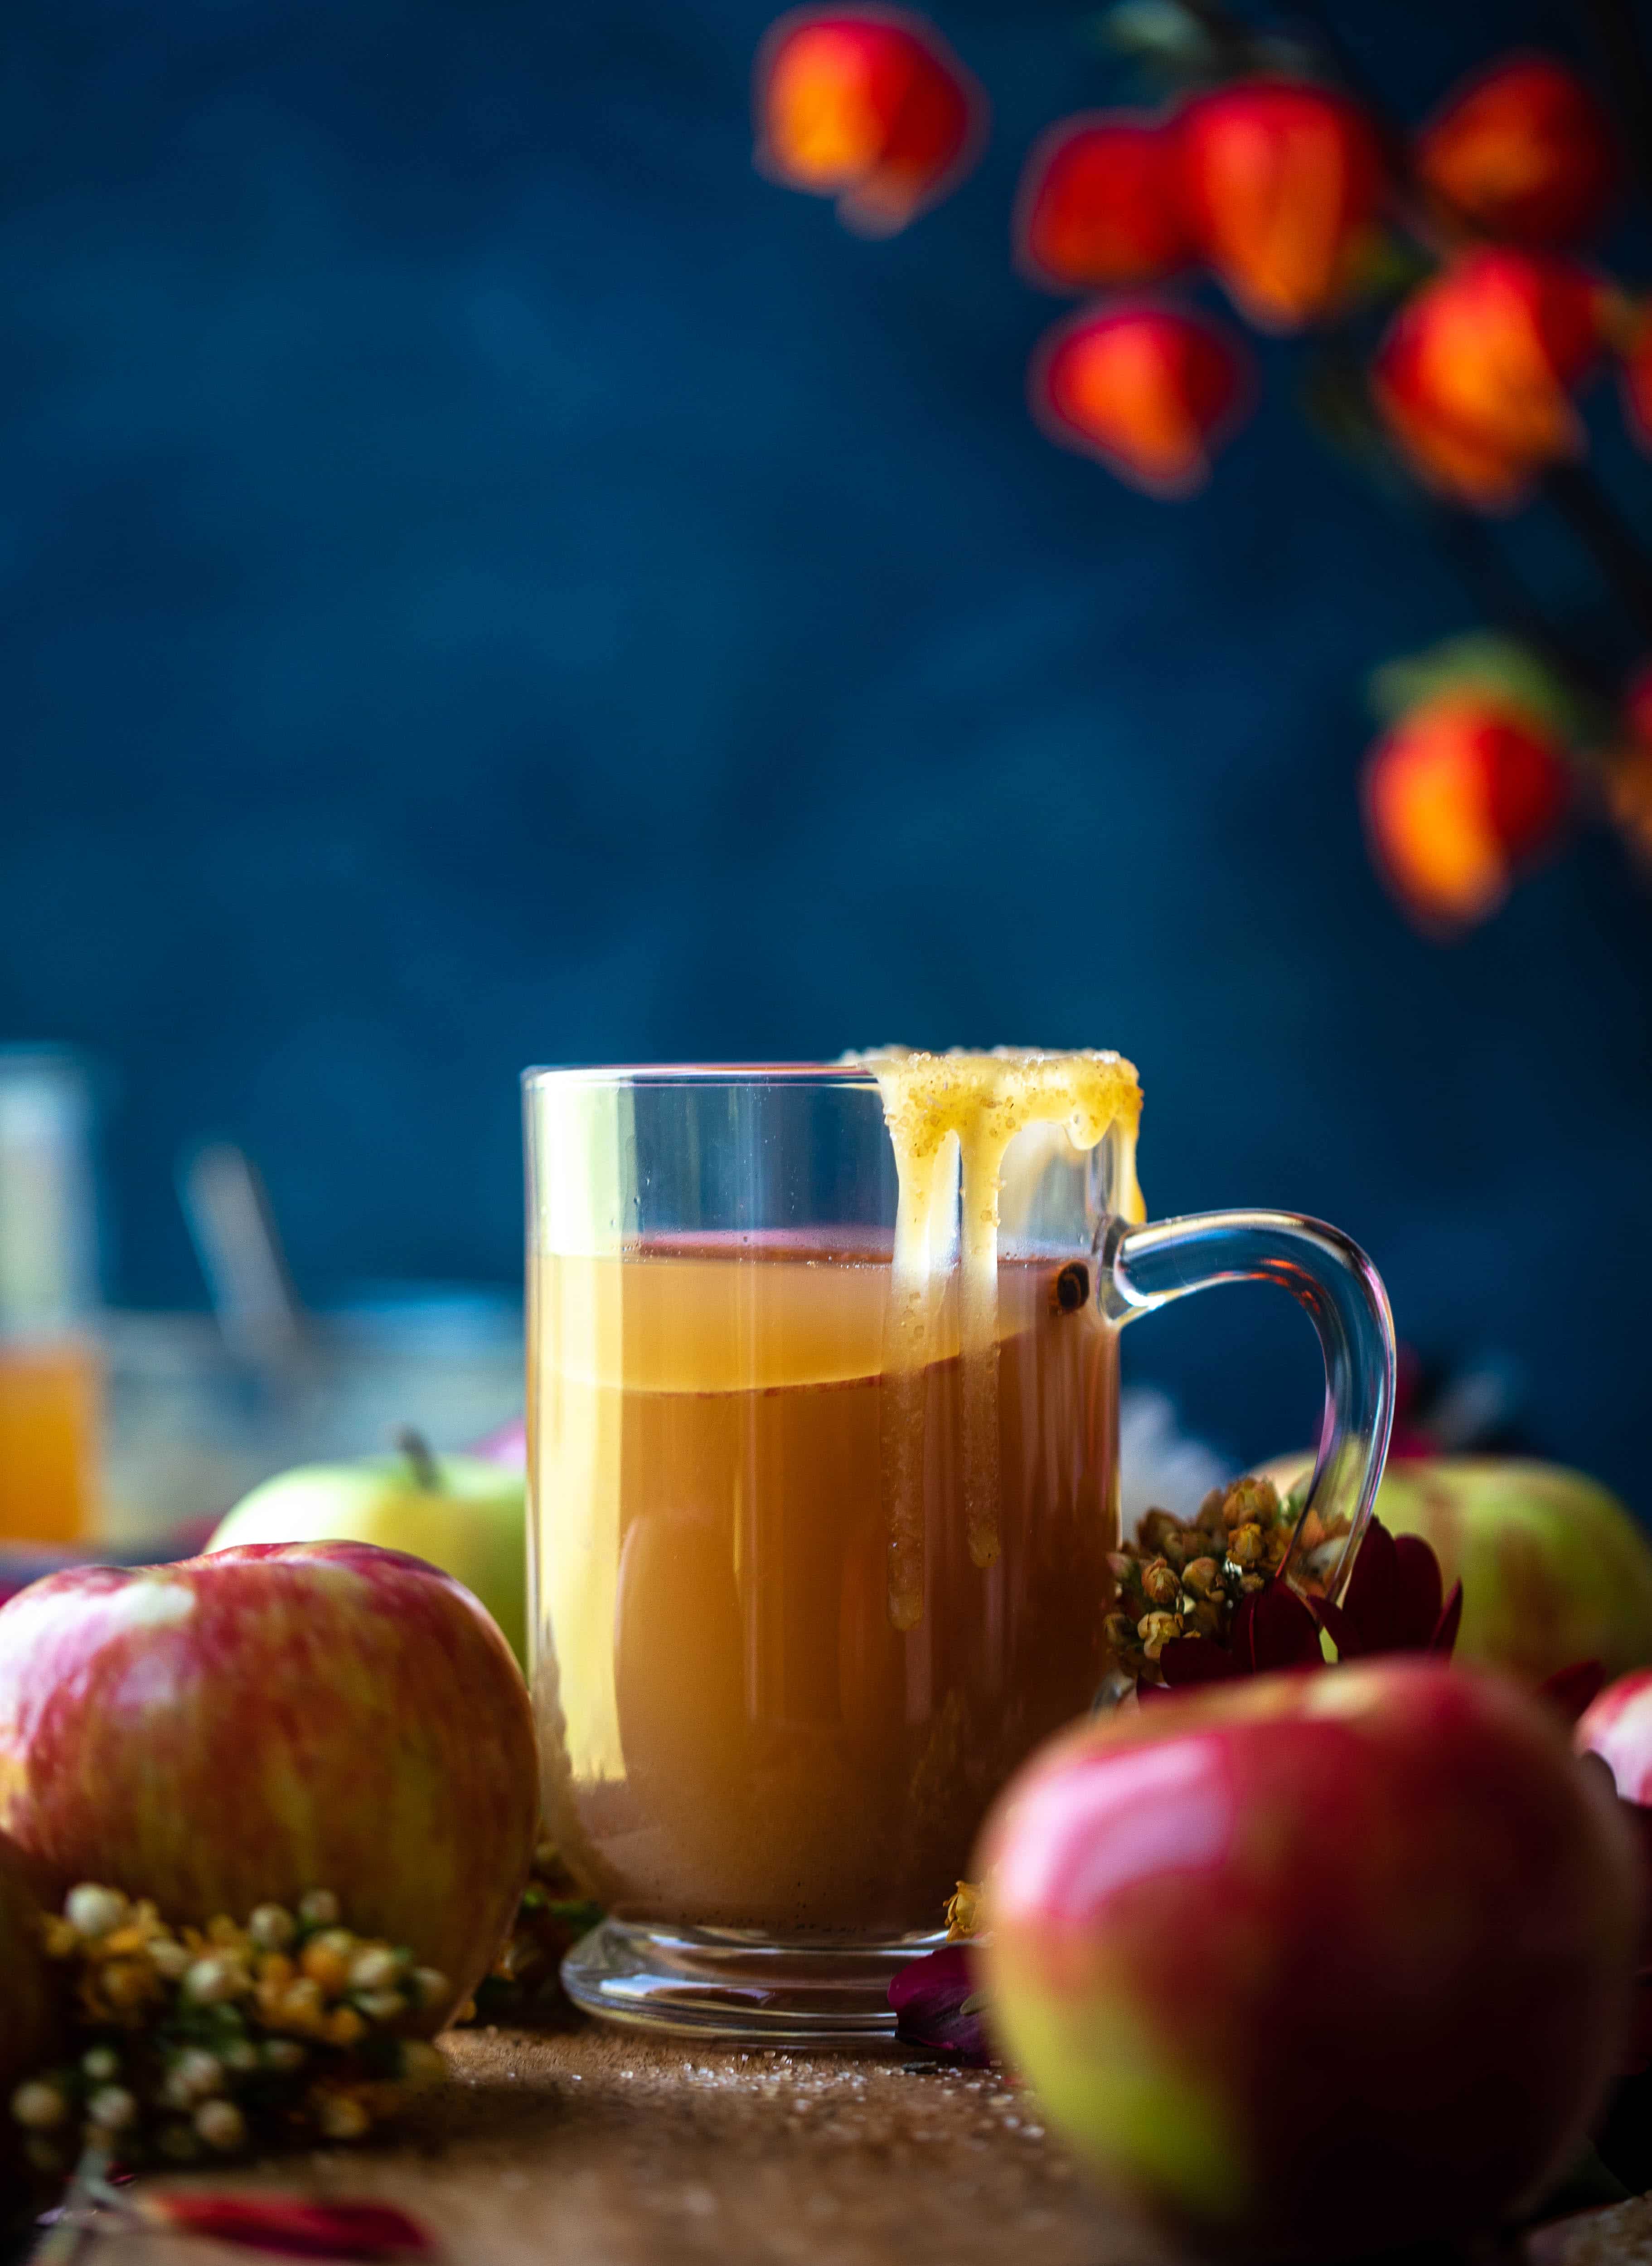 This homemade apple cider is made with honeycrisp apples, spices and vanilla. It's incredible served hot or cold, especially with a pour of bourbon!